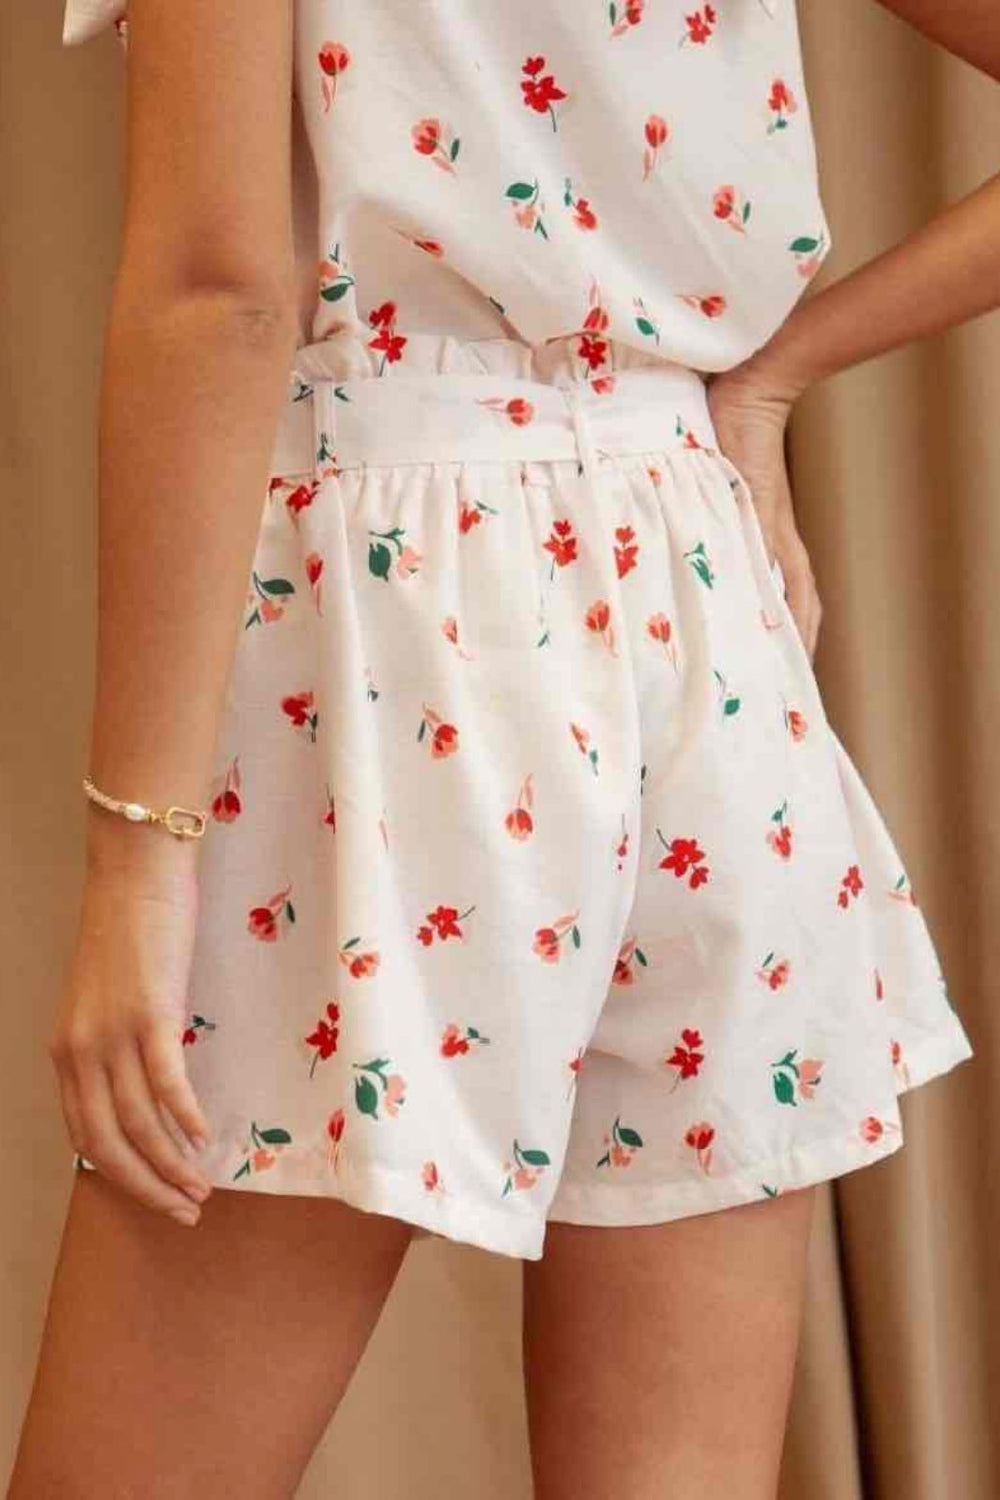 A-bee - Printed Shorts 2089-1 - Light Red Shorts 